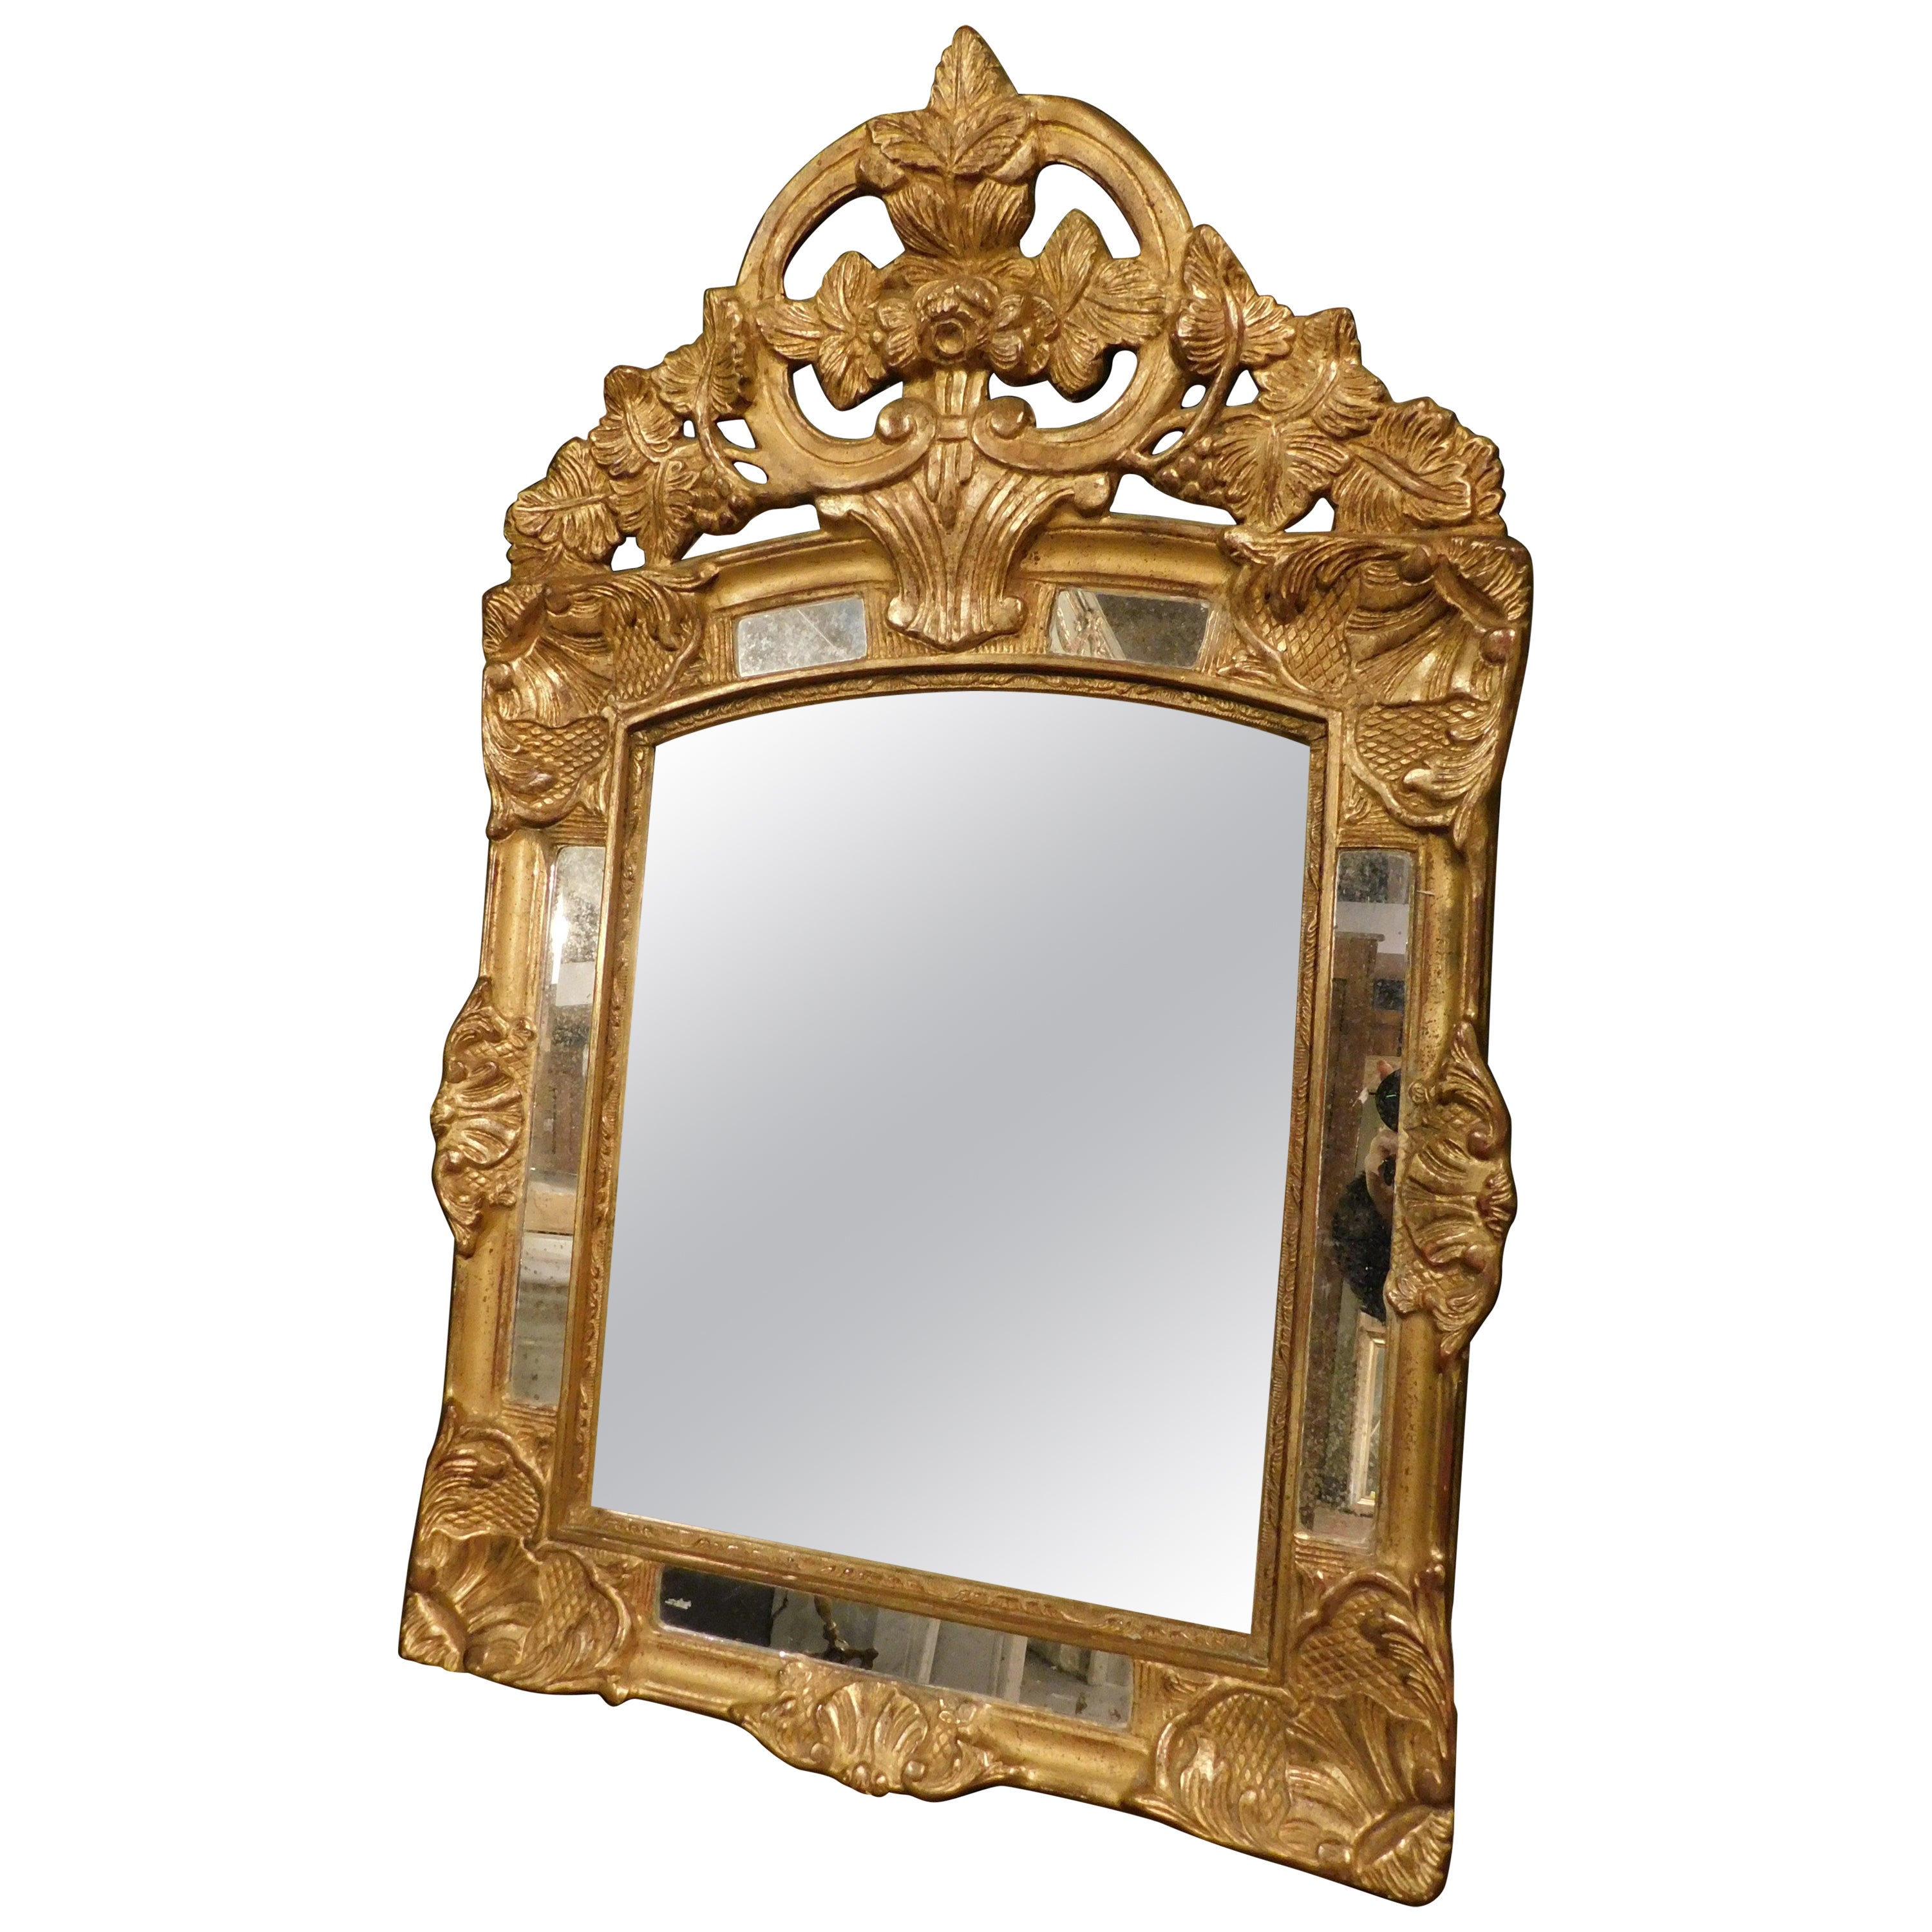 Small French Gilded Mirror with Framed Sculptures, 19th Century